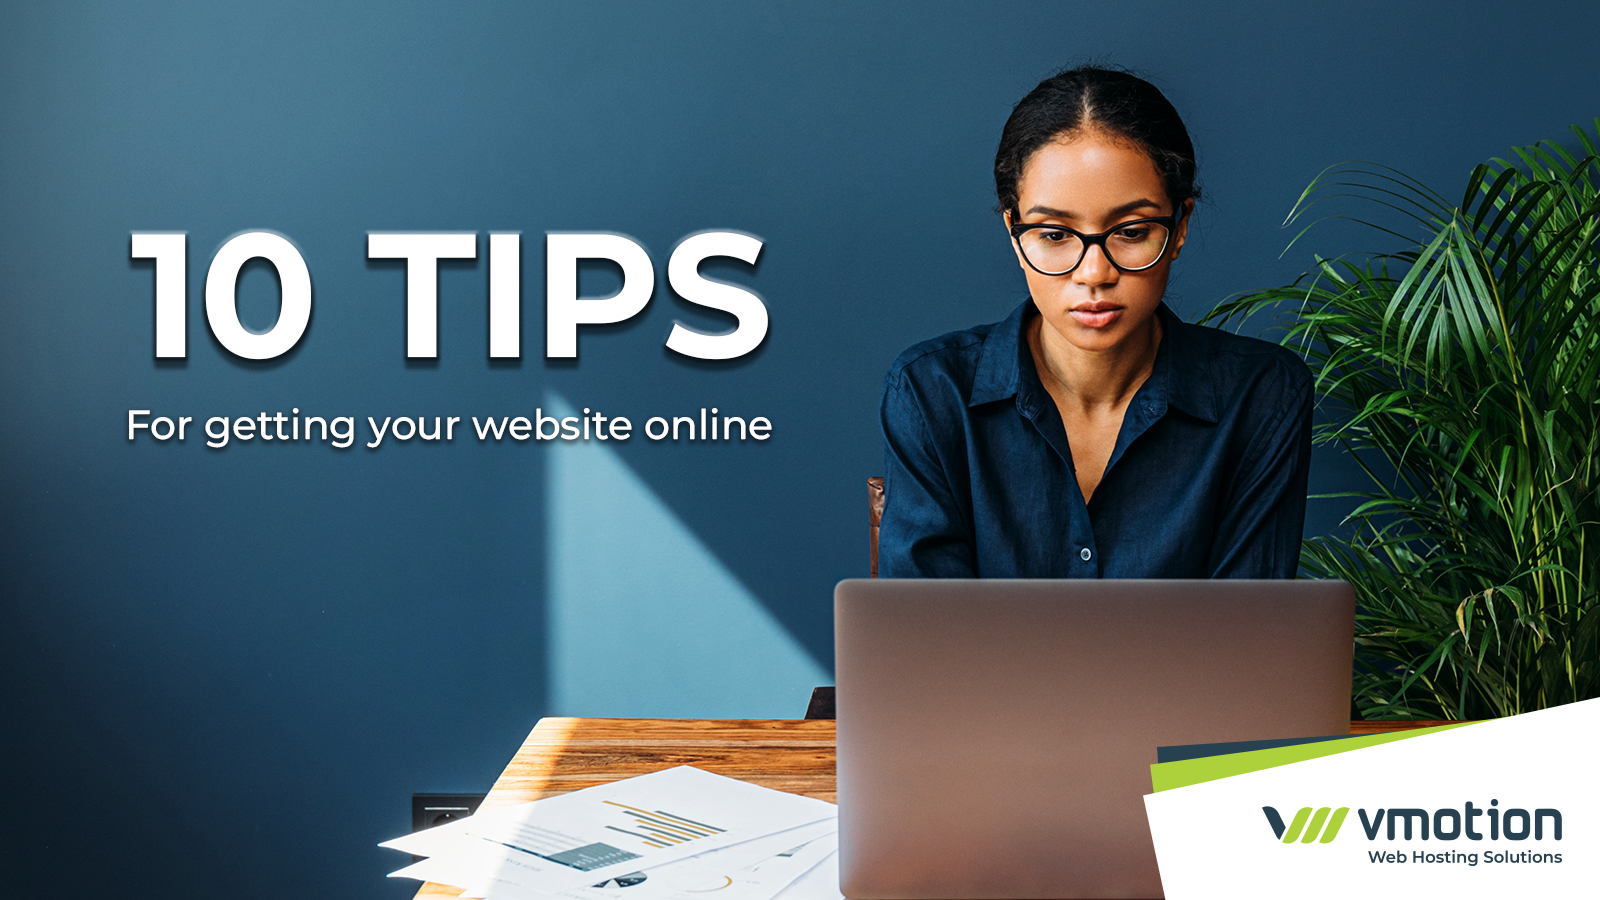 Building Your Online Presence: 10 Tips for Getting Your Website Up and Running